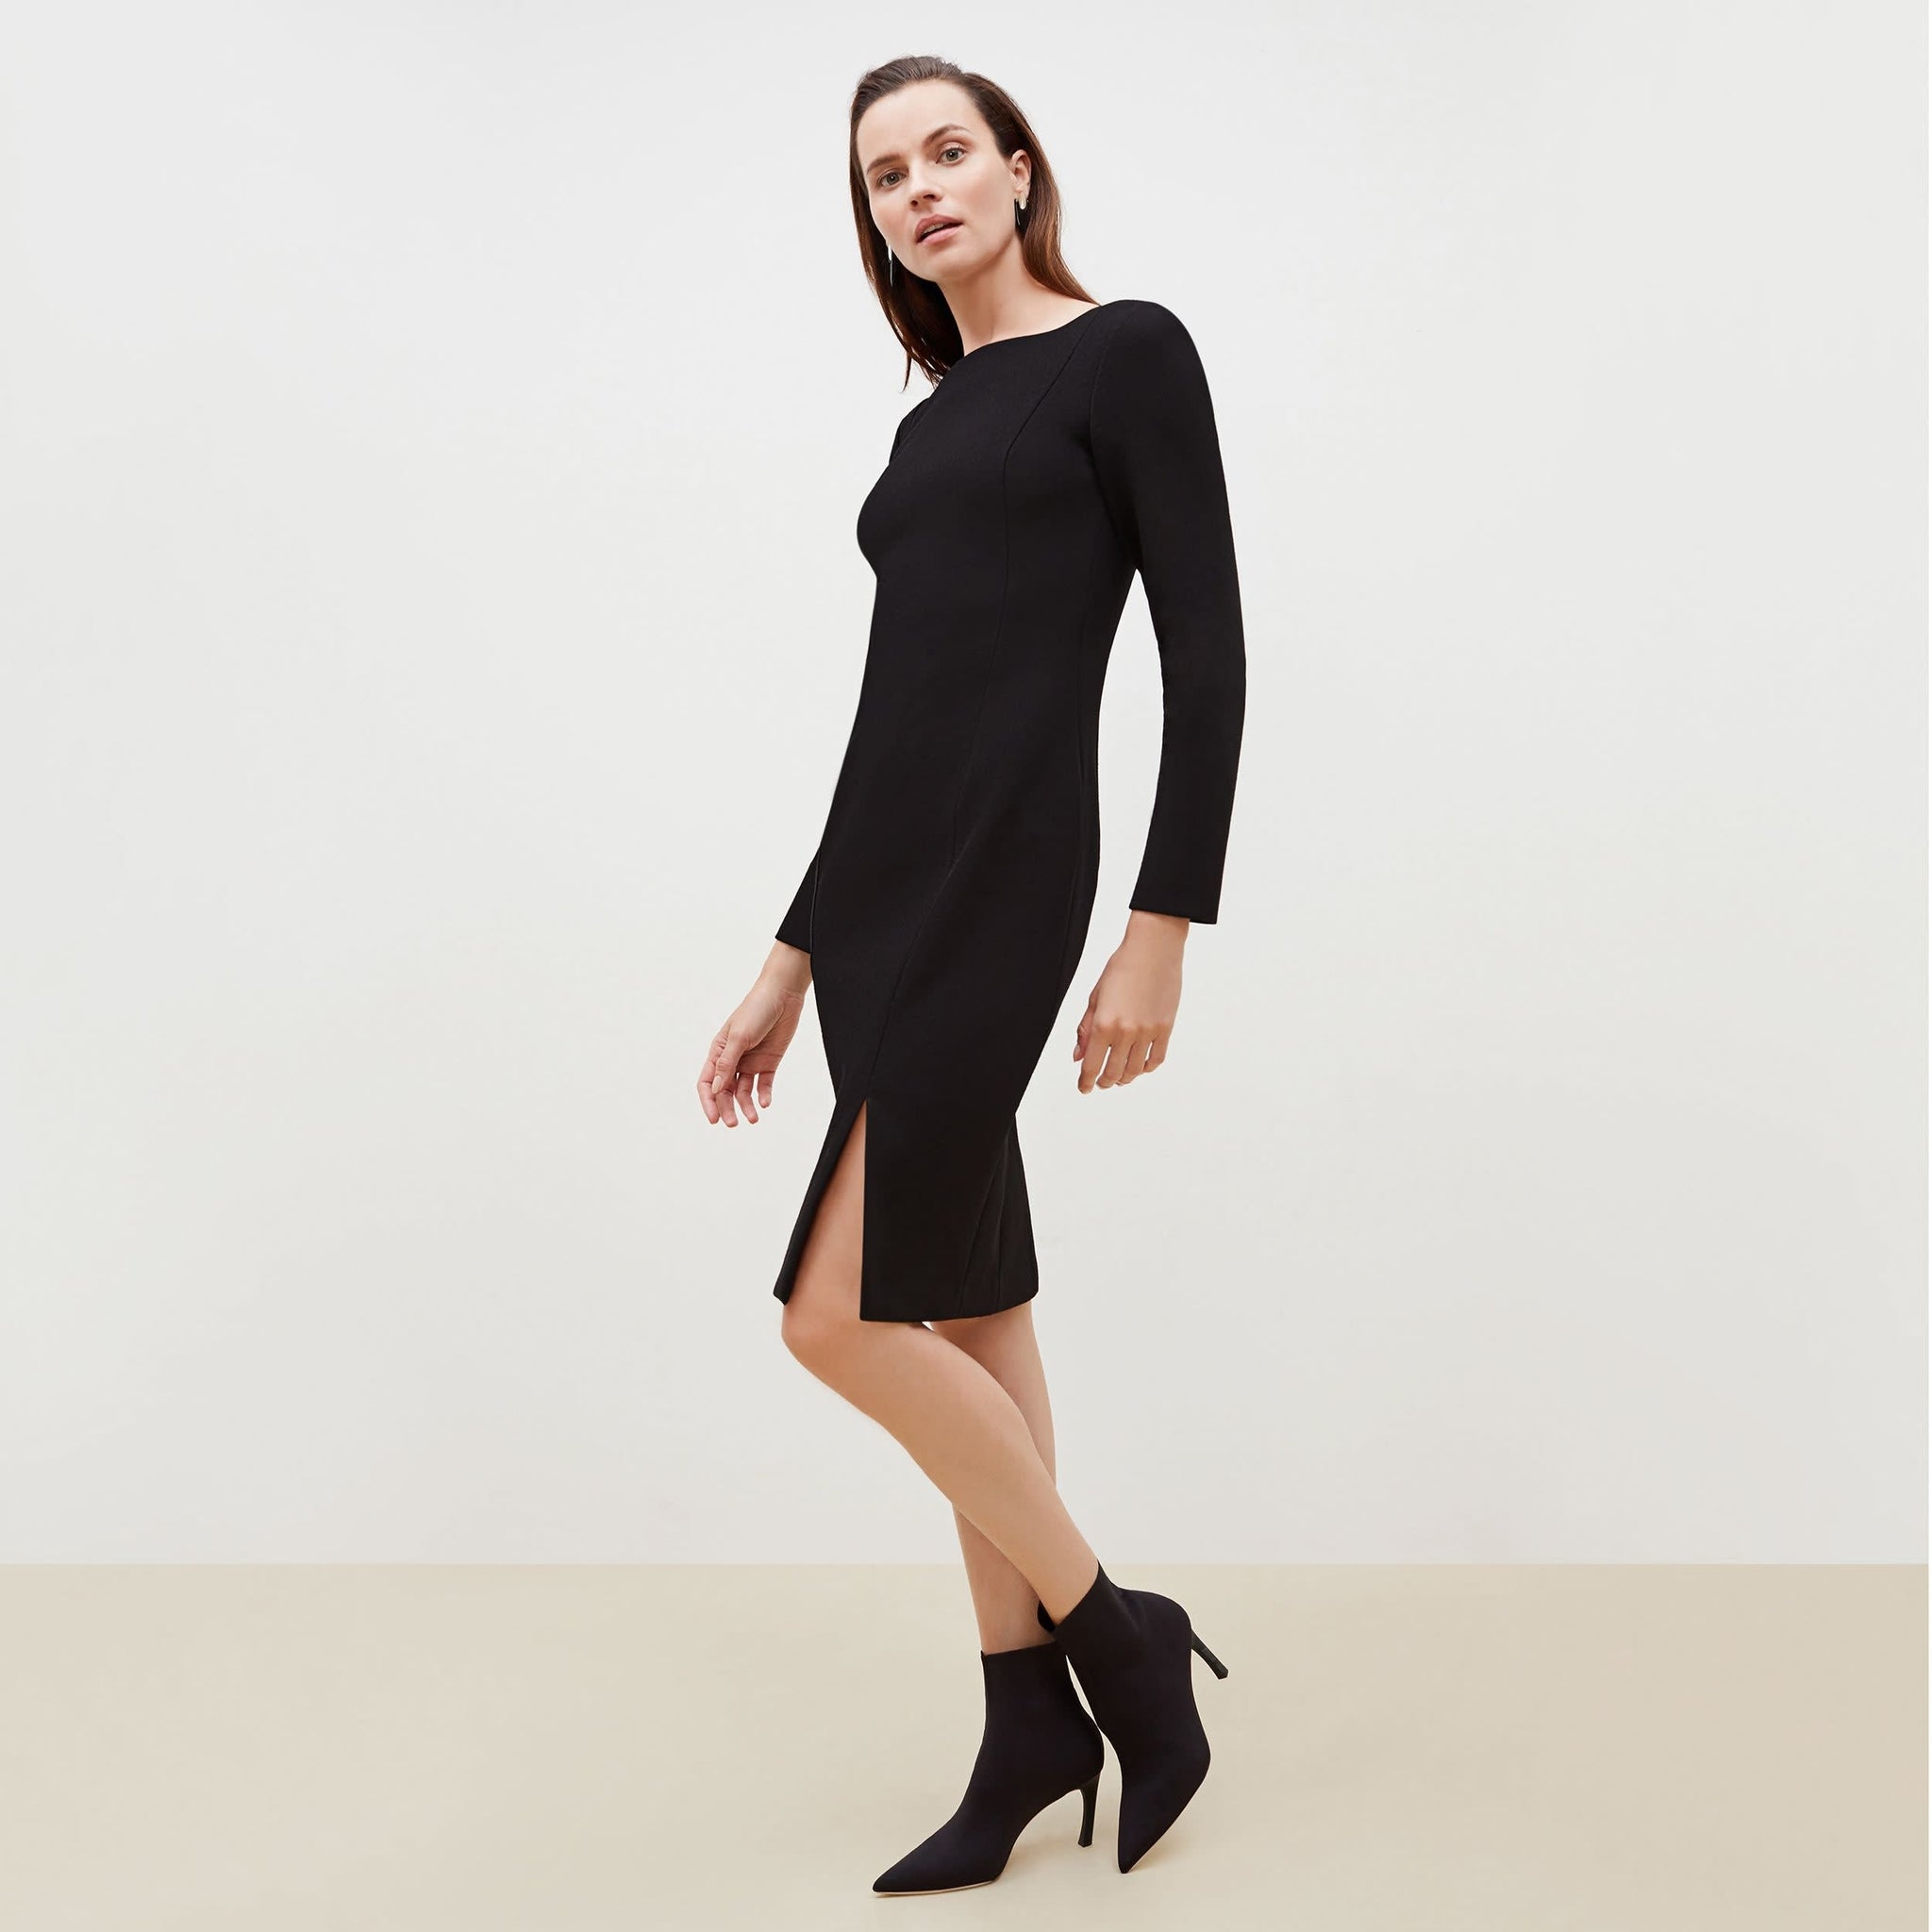 Side image of a woman standing wearing the Joanna Dress-Worth in Black